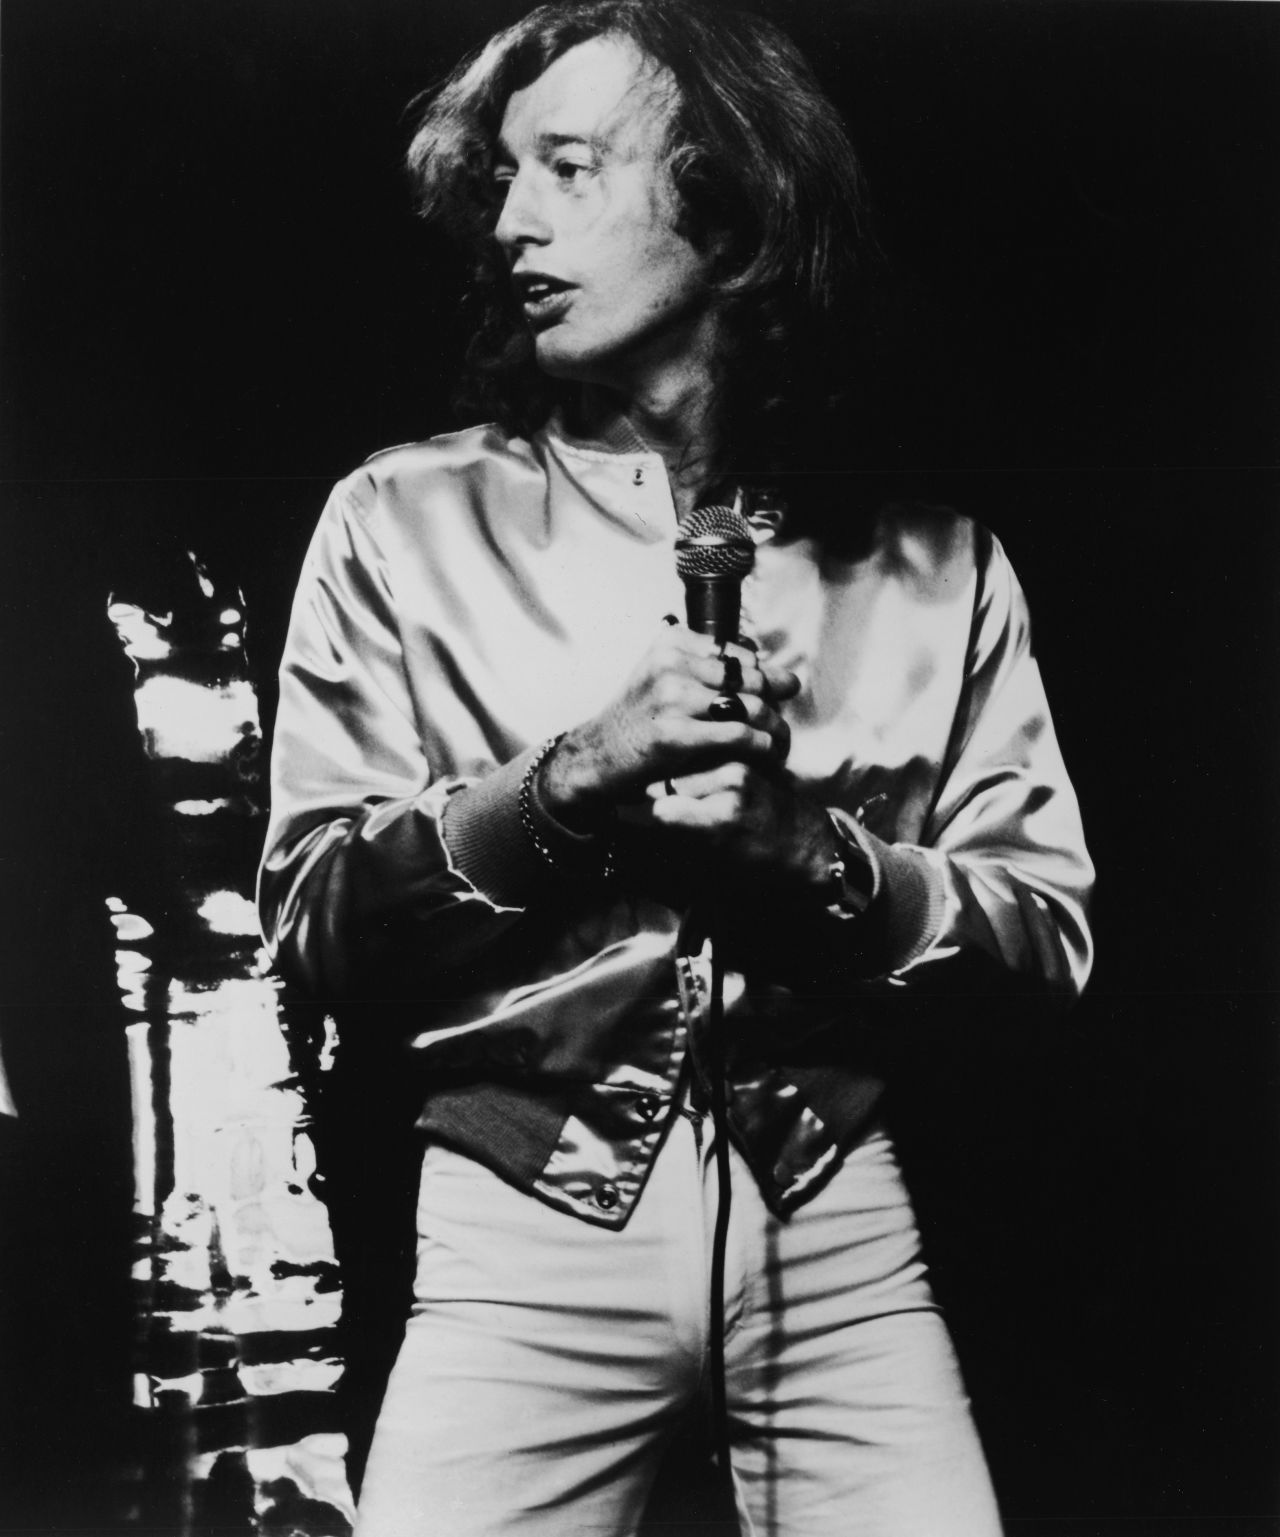 Robin Gibb sings on stage during a concert in London in 1975.